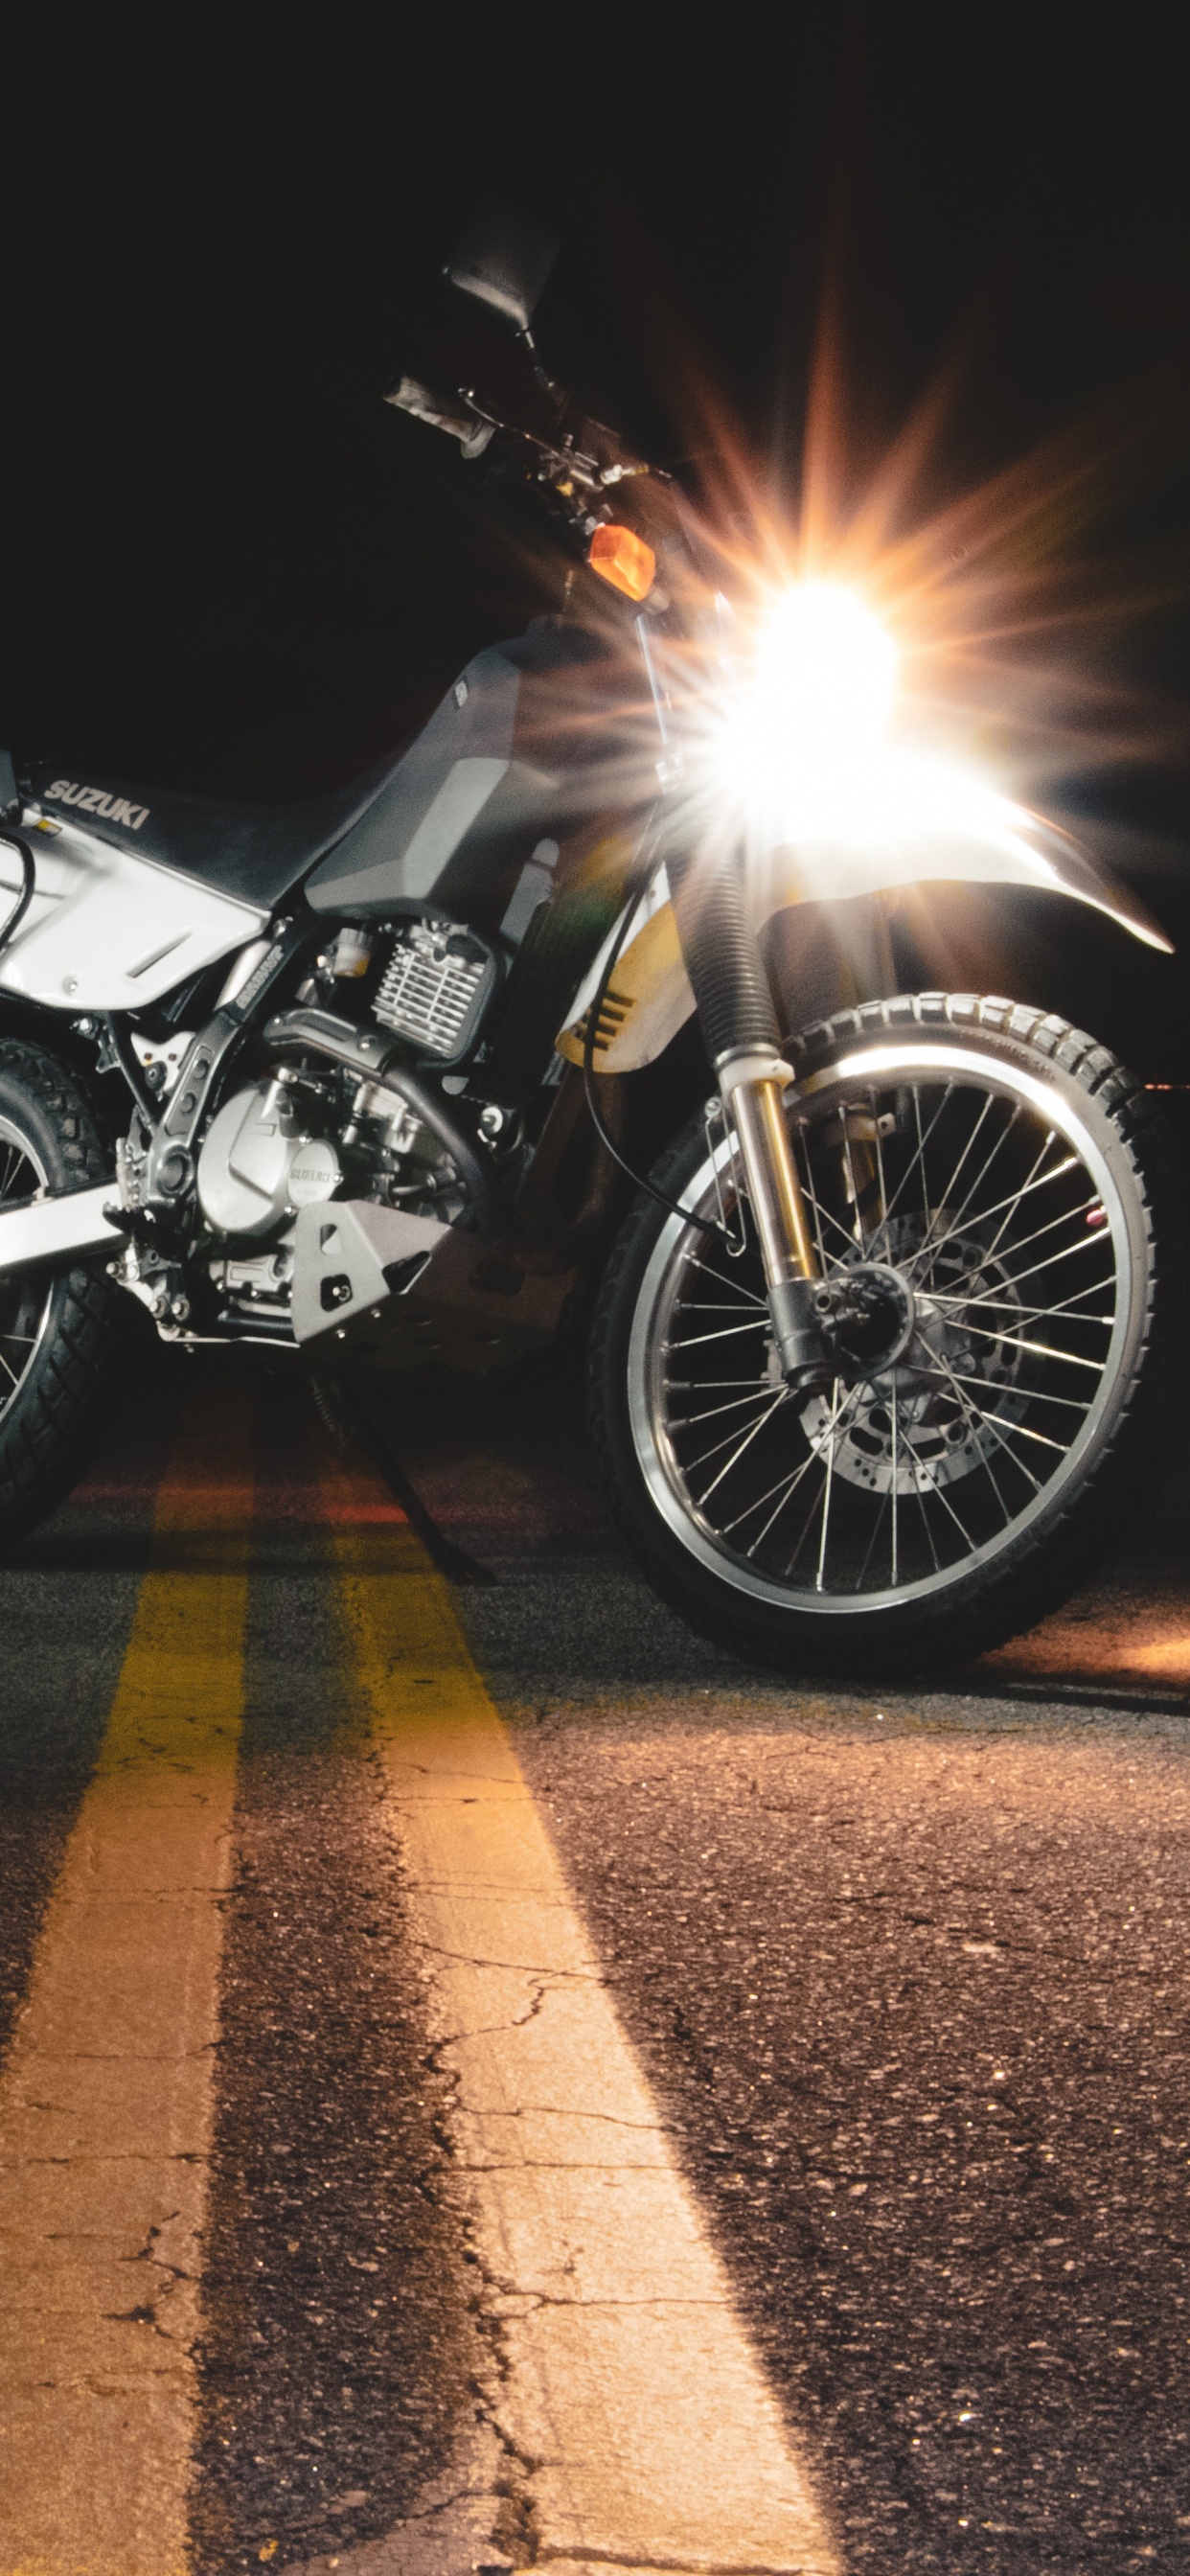 Black and Silver Motorcycle on Road During Night Time. Wallpaper in 1242x2688 Resolution